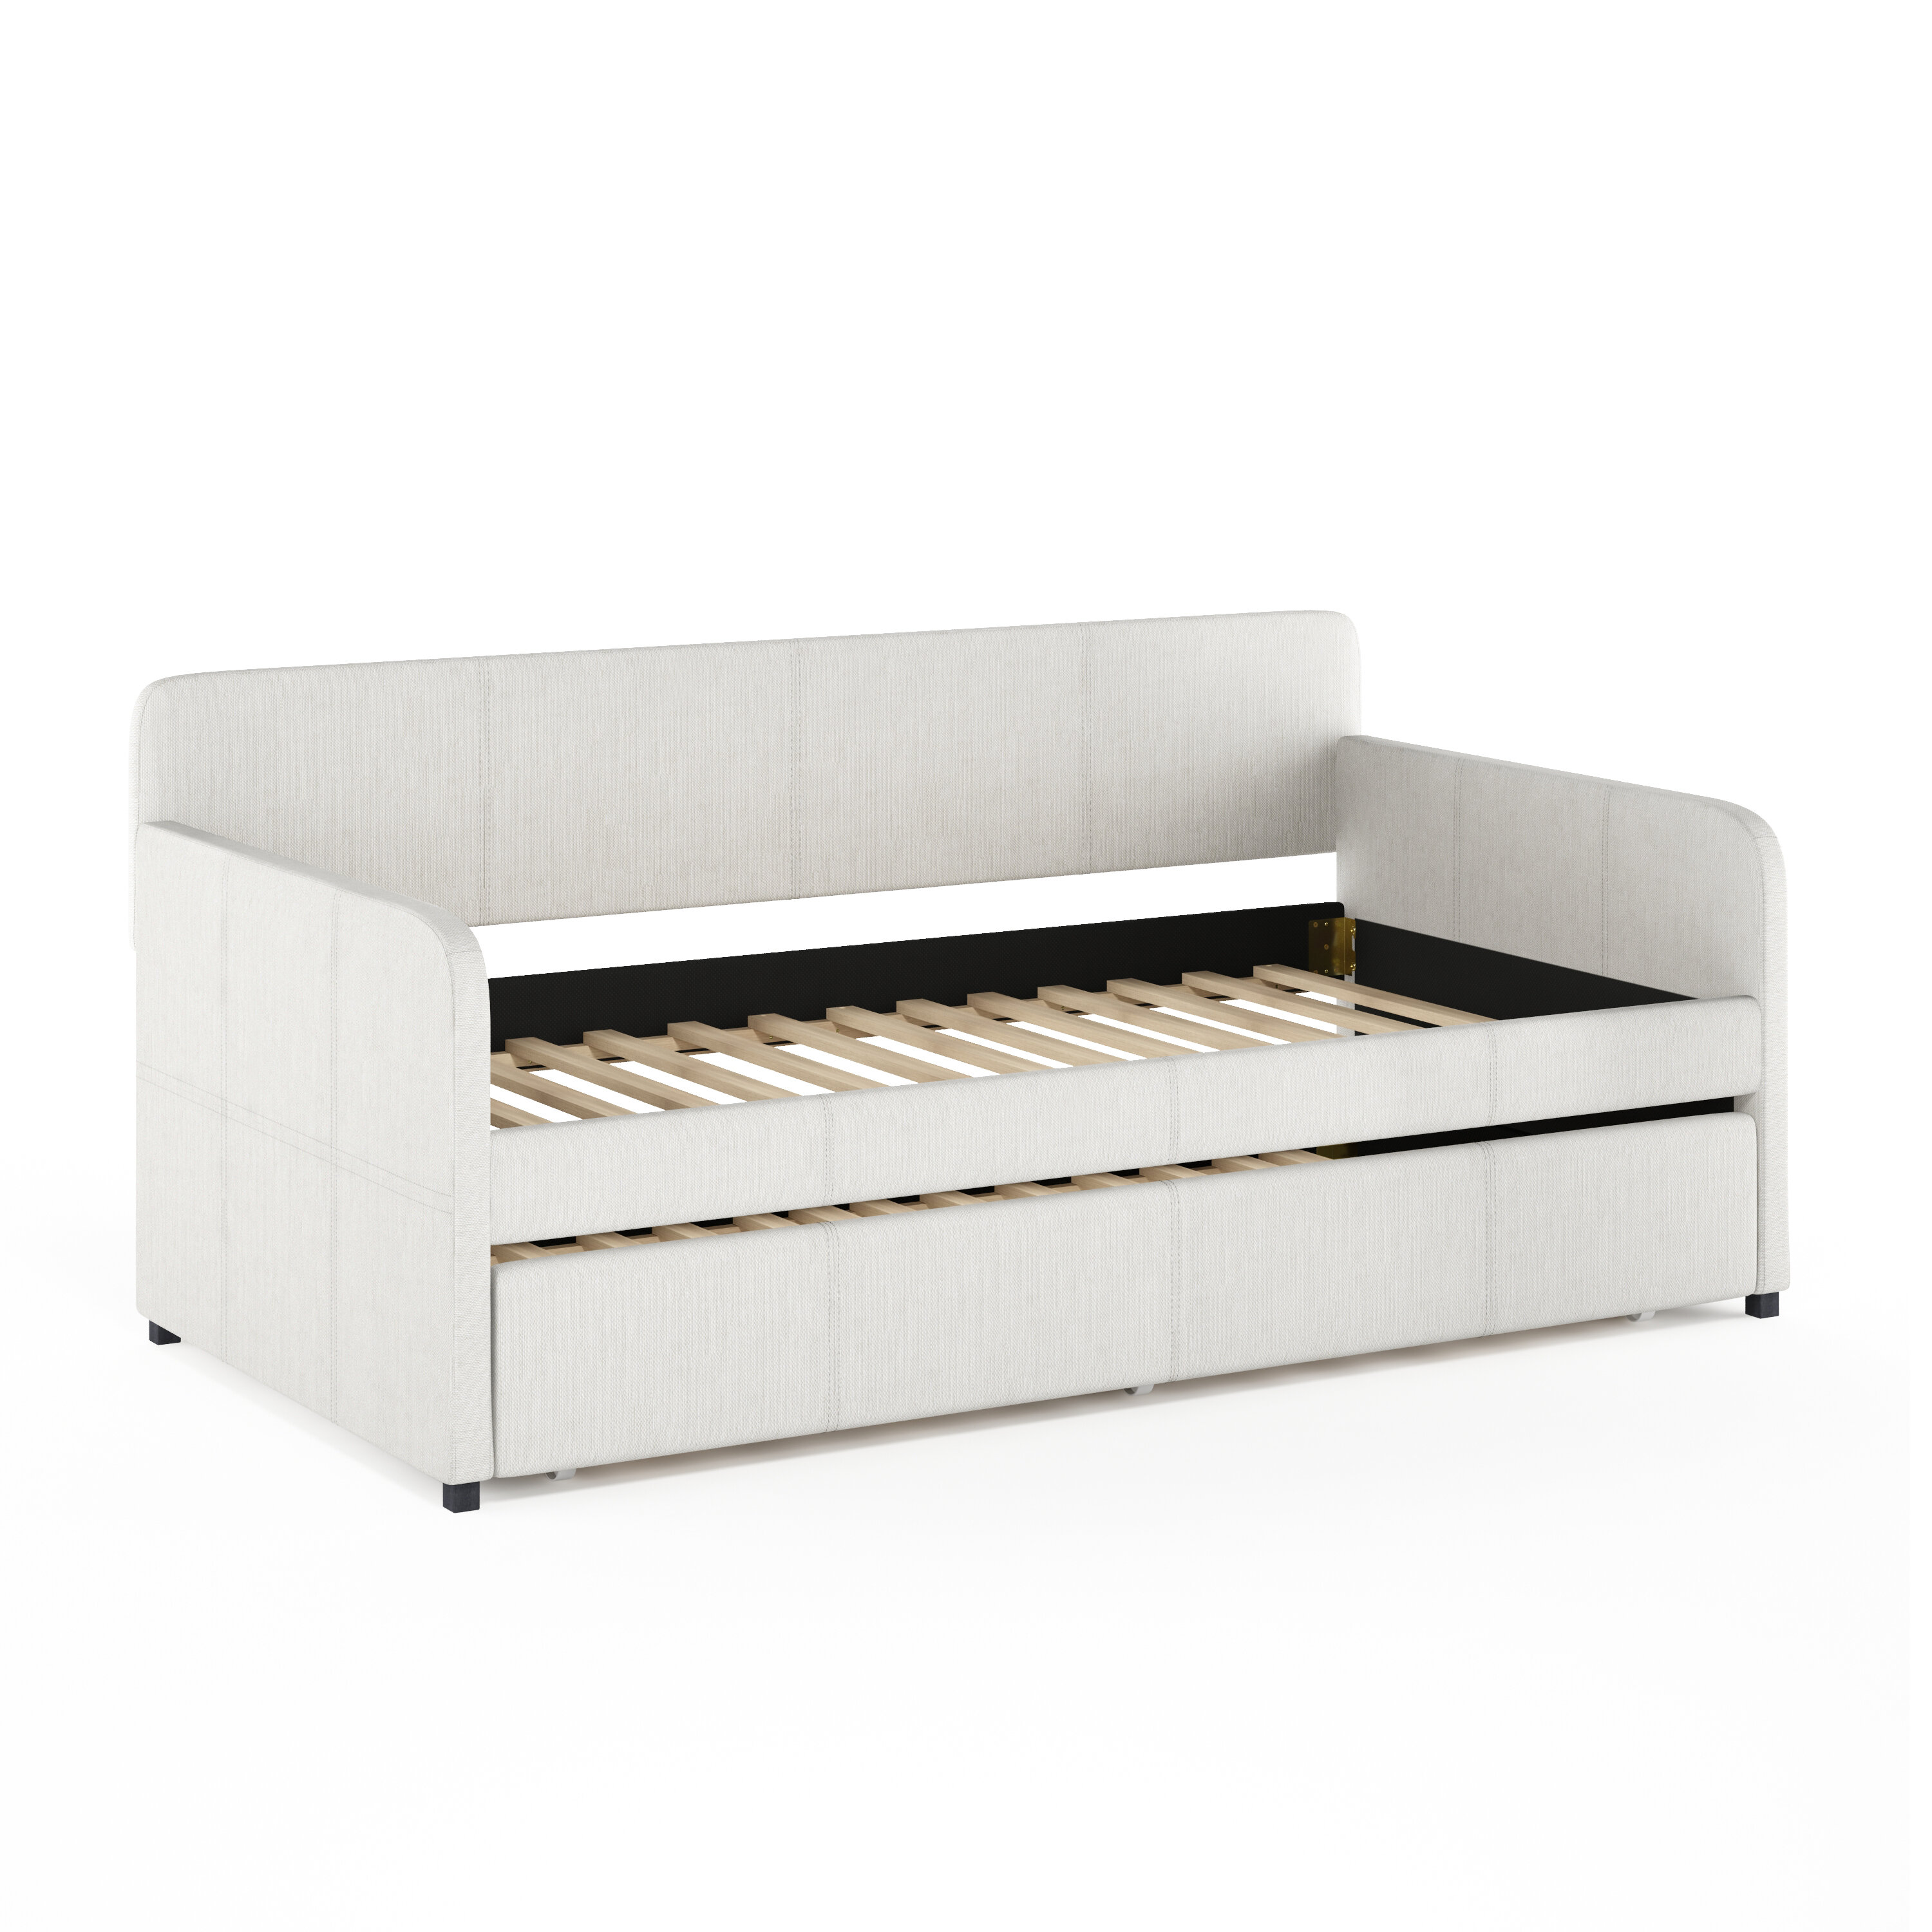 Brayden Studio® Harty Upholstered Daybed with Trundle & Reviews | Wayfair